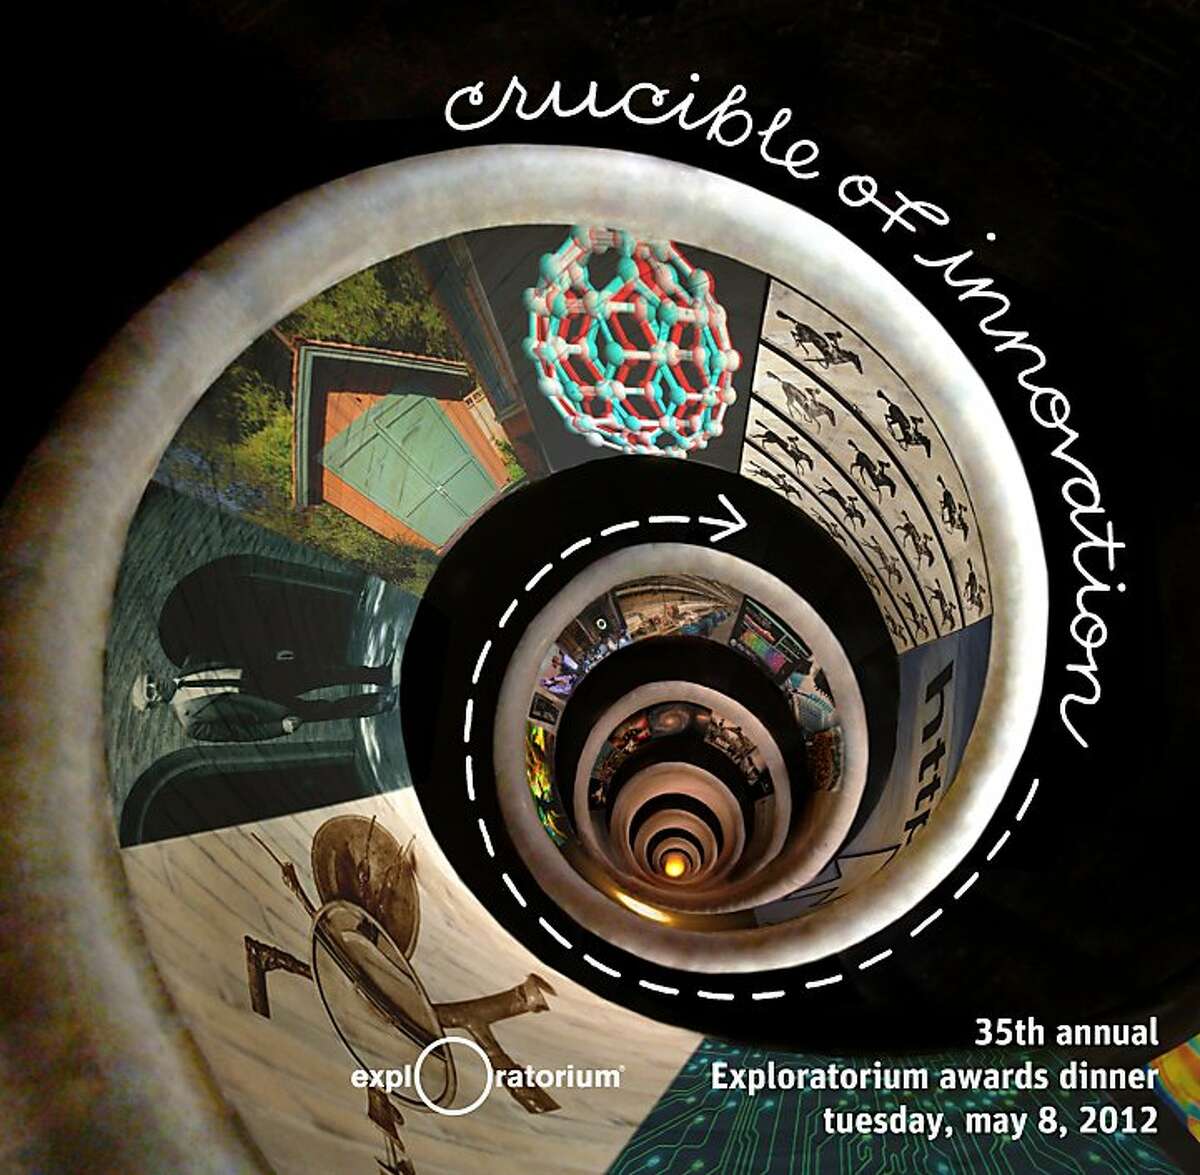 Crucible of Innovation. 35th Annual awards dinner. Tuesday, May 8, 2012 at the Exploratorium. Benefits the Exploratorium